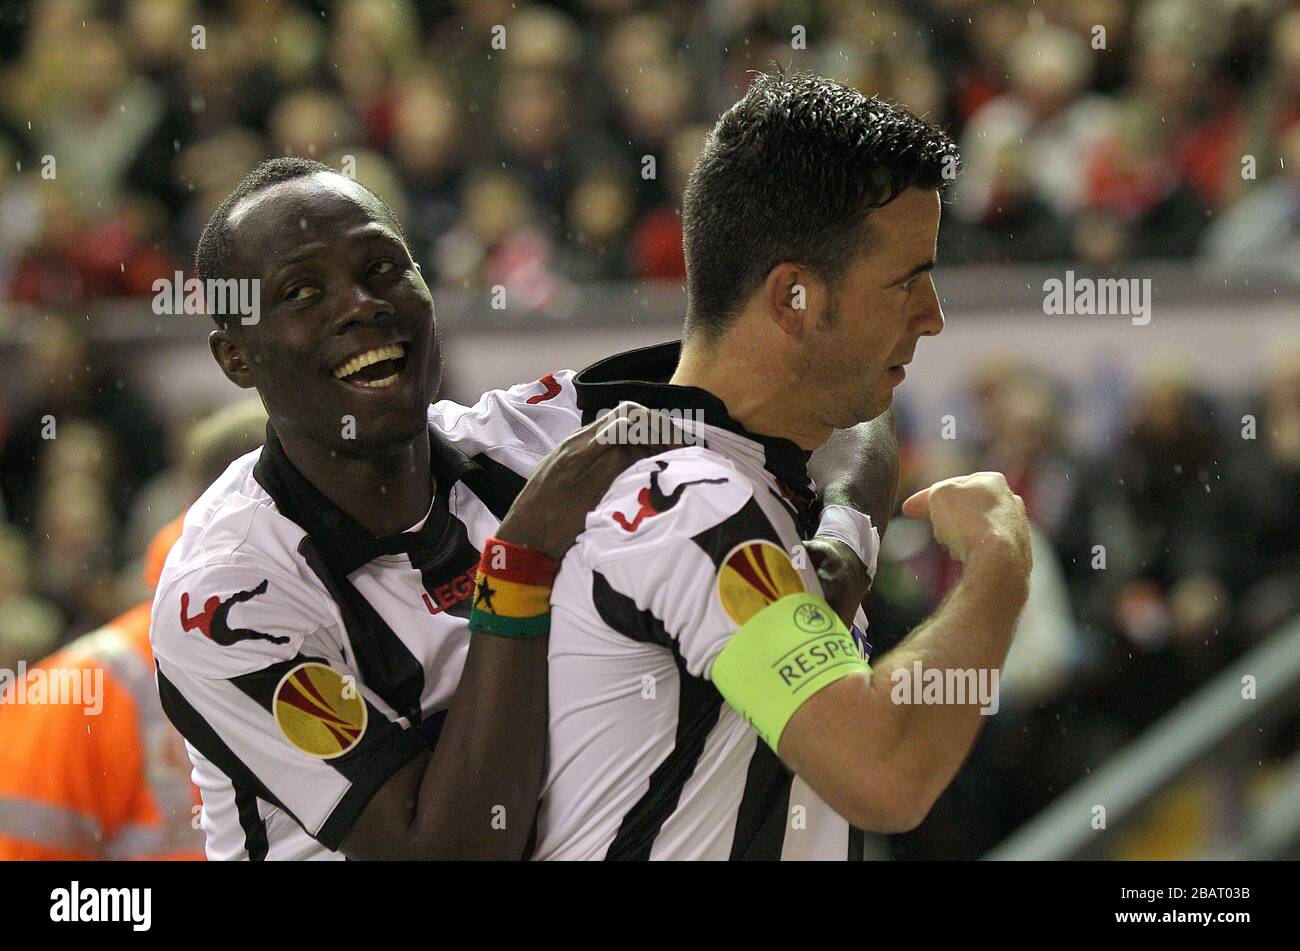 Udinese's Antonio Di Natale celebrates scoring their first goal of the game with team-mate Emmanuel Agyemang-Badu (left) Stock Photo